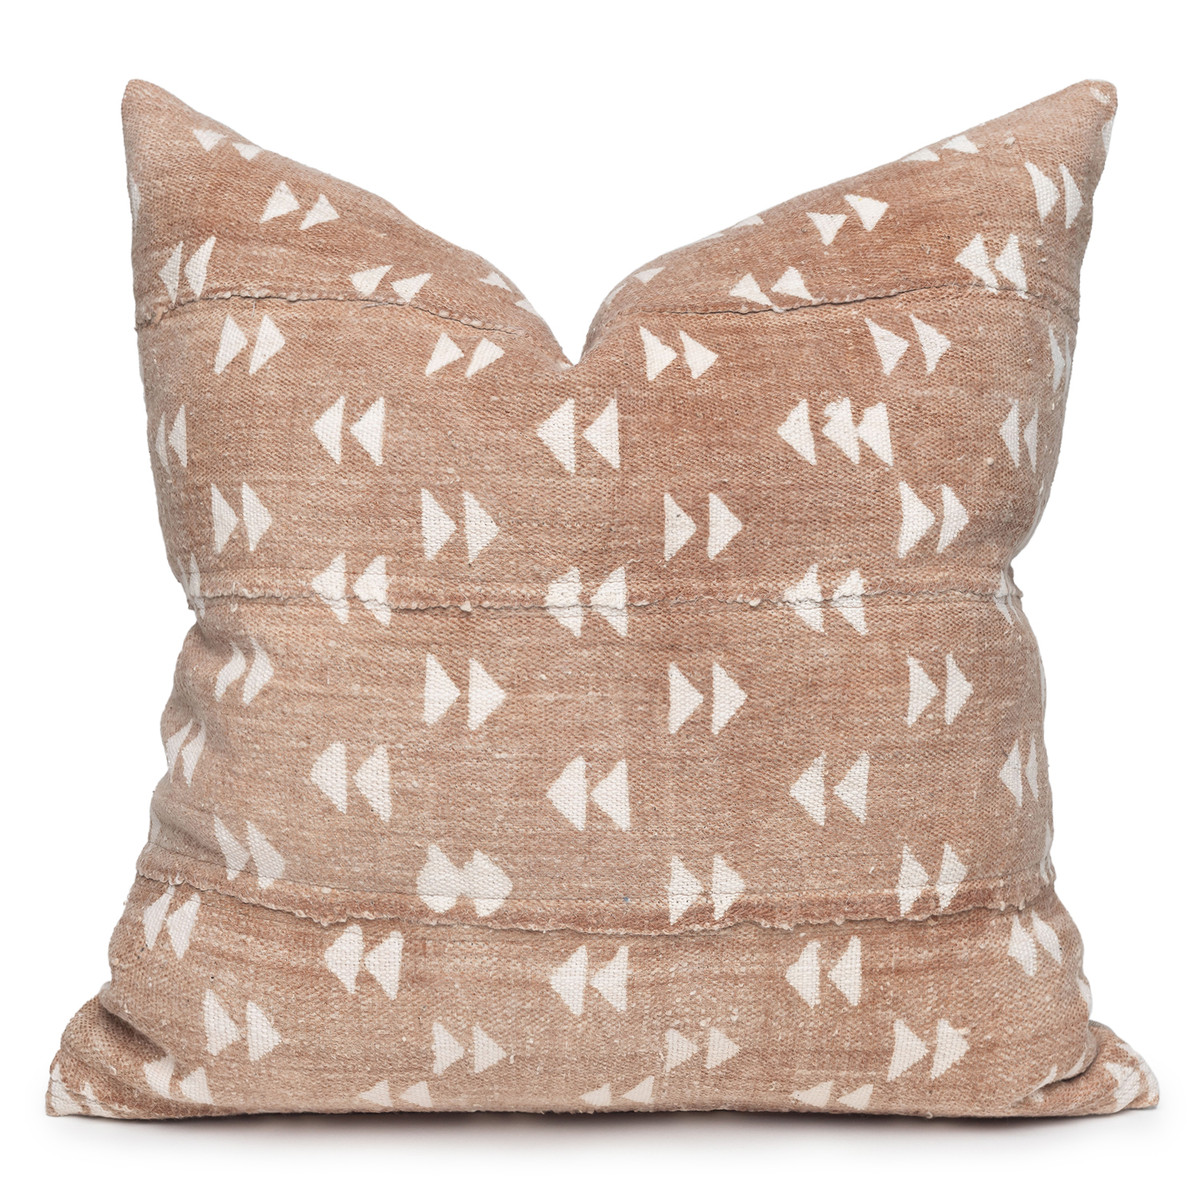 Gill Pillow, Rust and Ivory Mud Cloth Pillow - 22"- Front